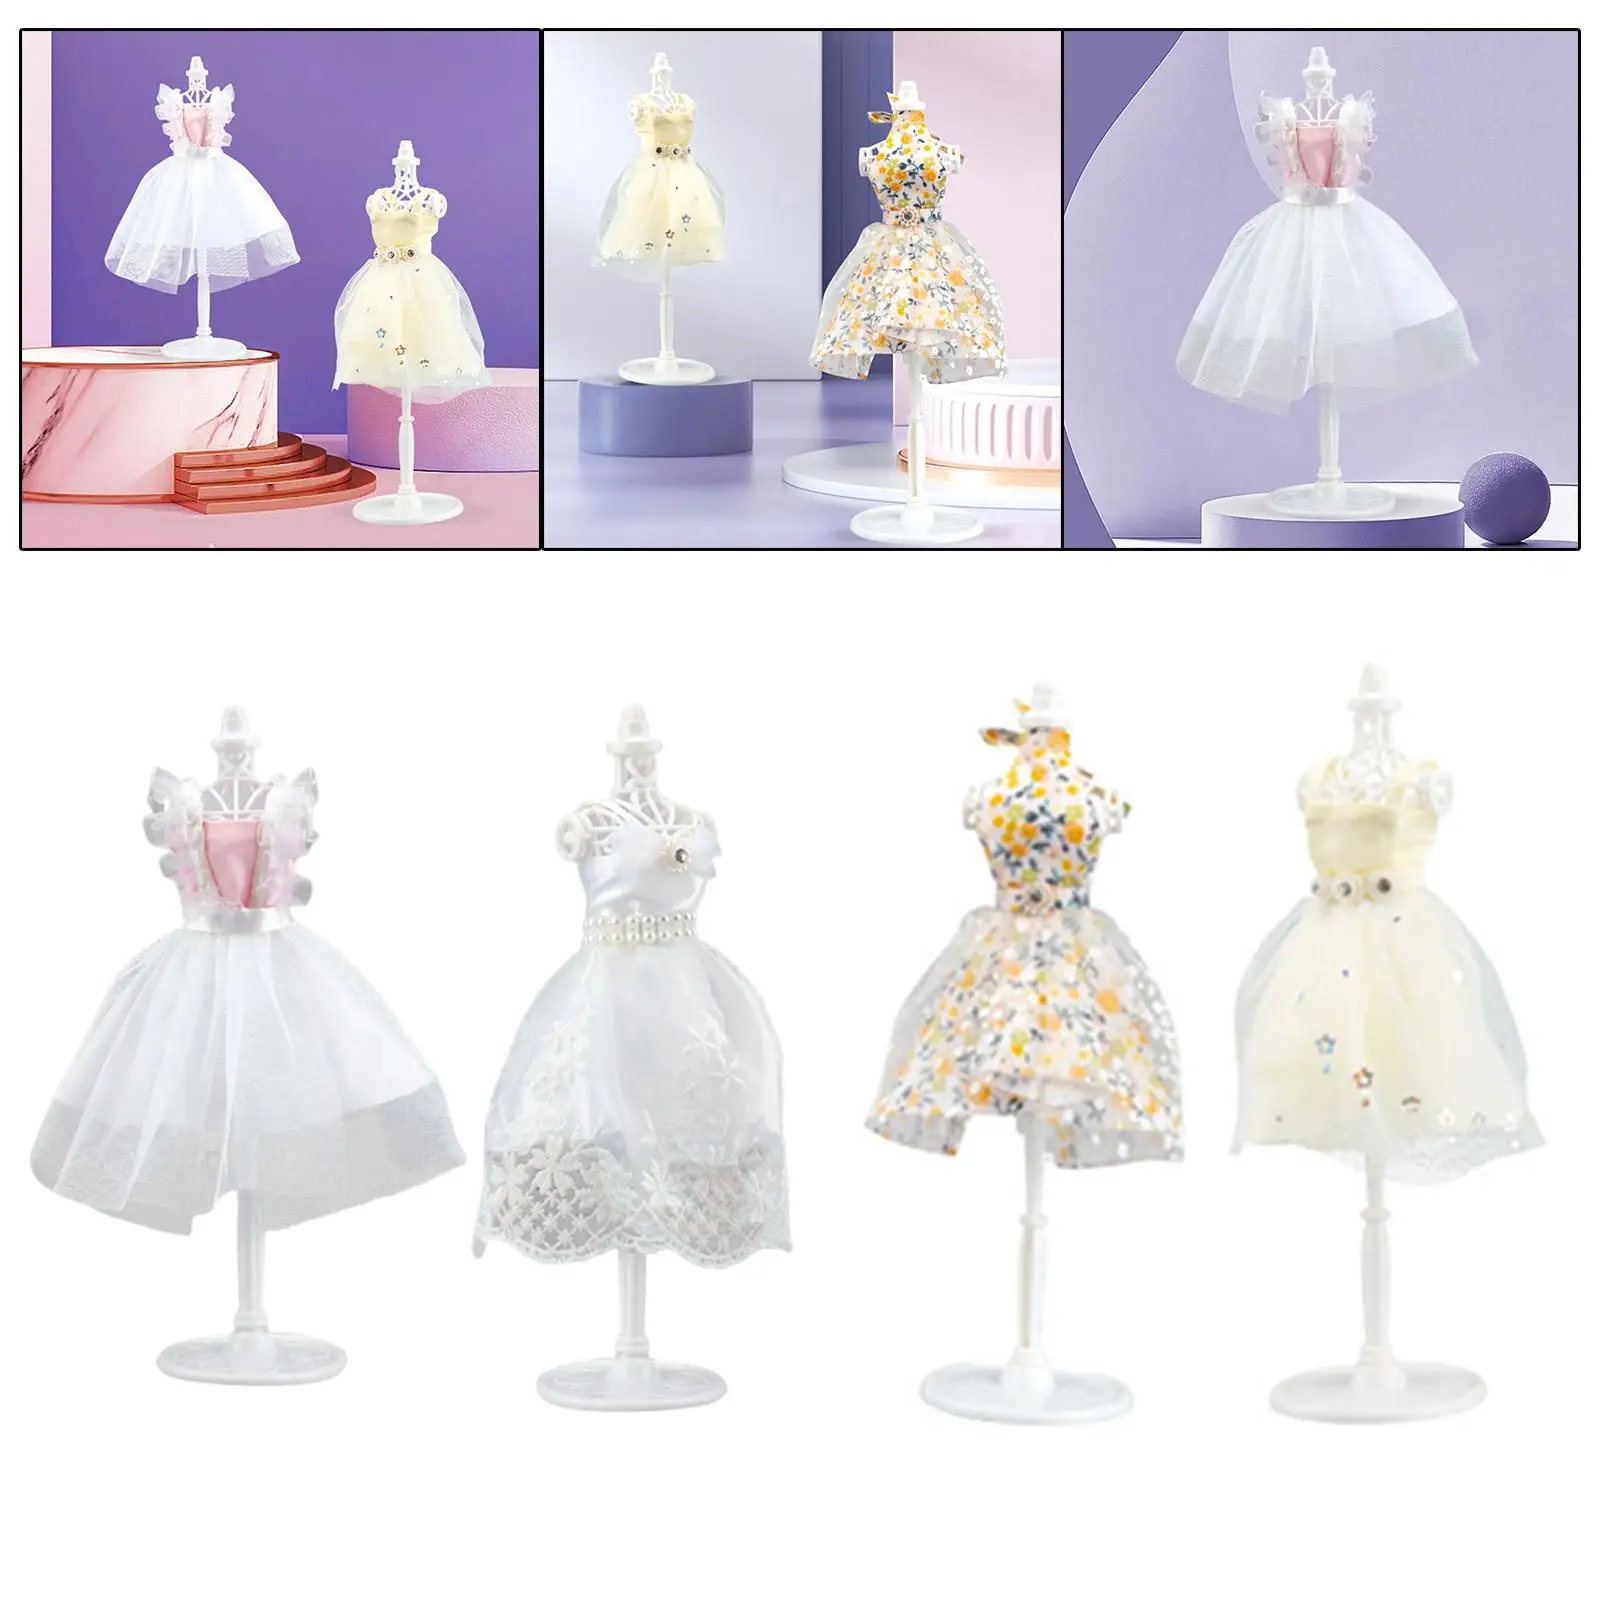 Doll Clothing design Learning Toys Princess Doll Clothes Making Princess Dress Clothes Set Fashion Design Kit for Party